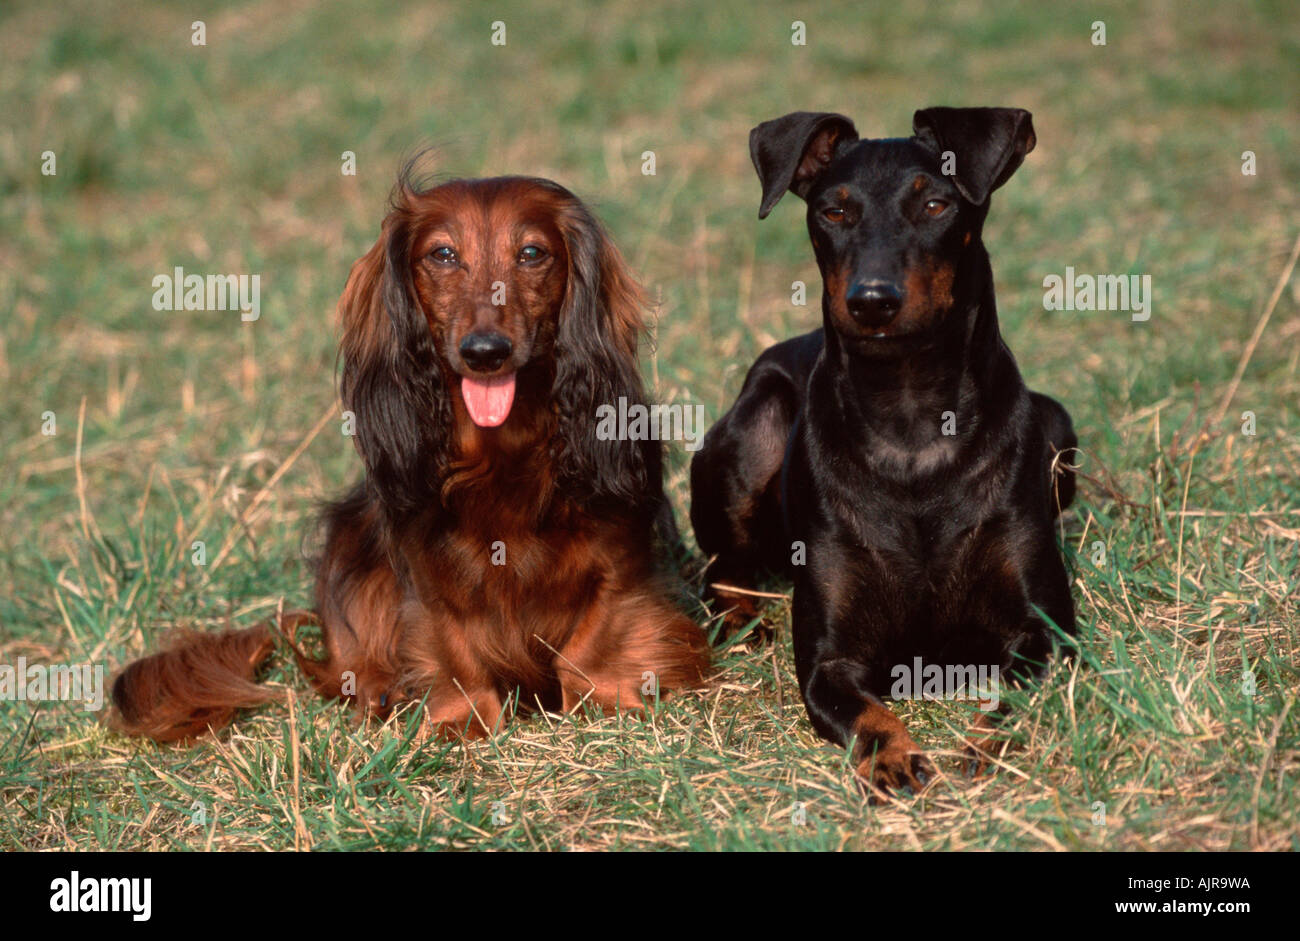 Manchester Terrier And Longhaired Dachshund Stock Photo Alamy